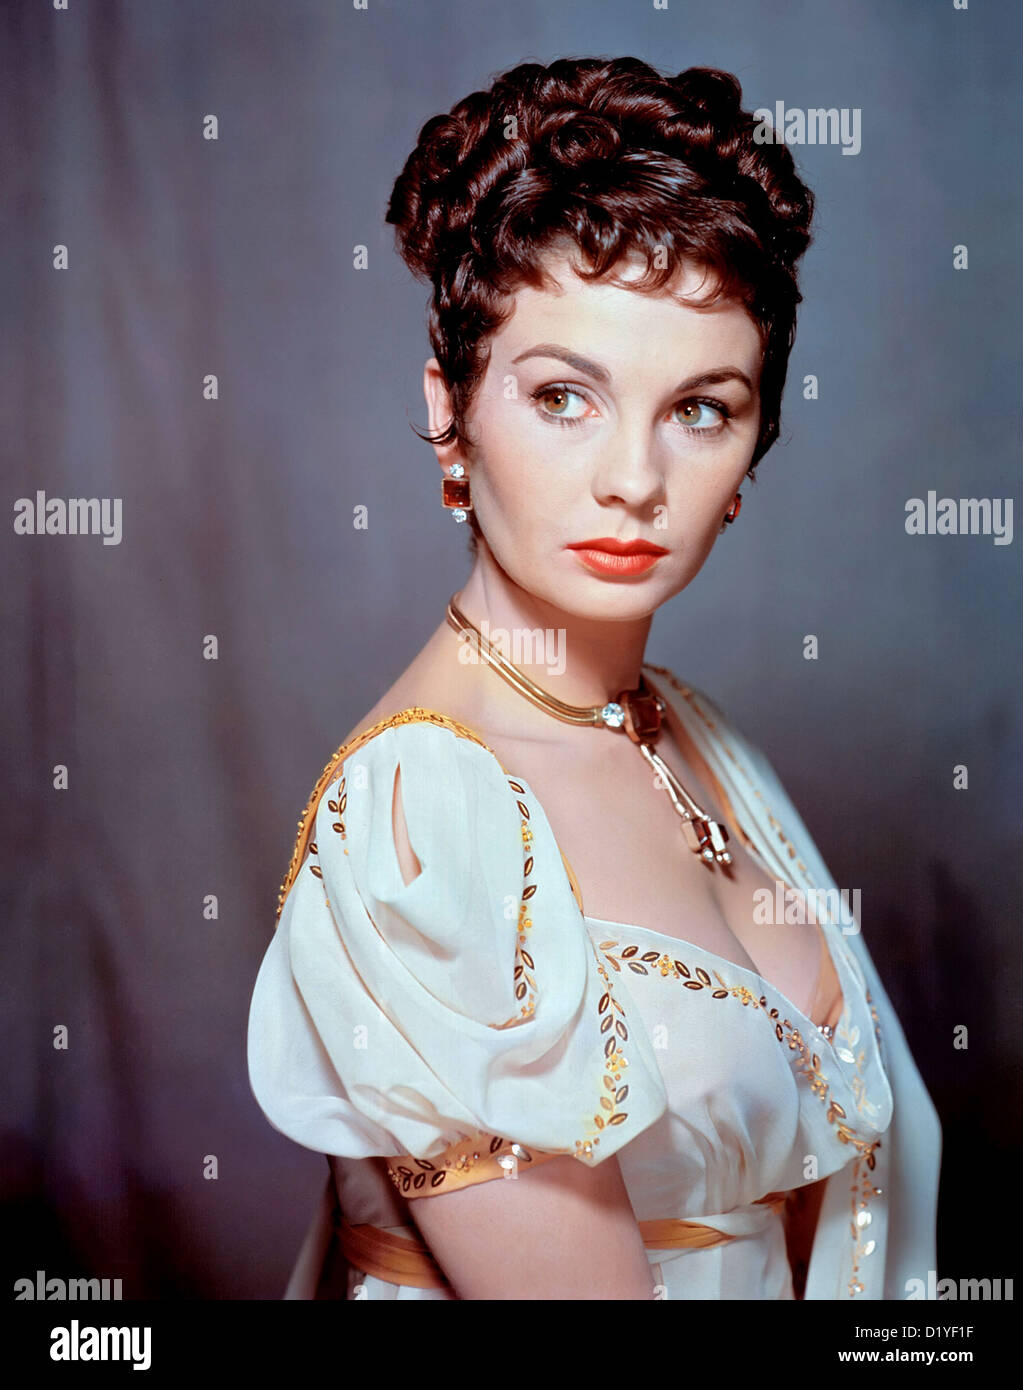 DESIREE 1954 20th Century Fox film with Jean Simmons in the title role  Stock Photo - Alamy